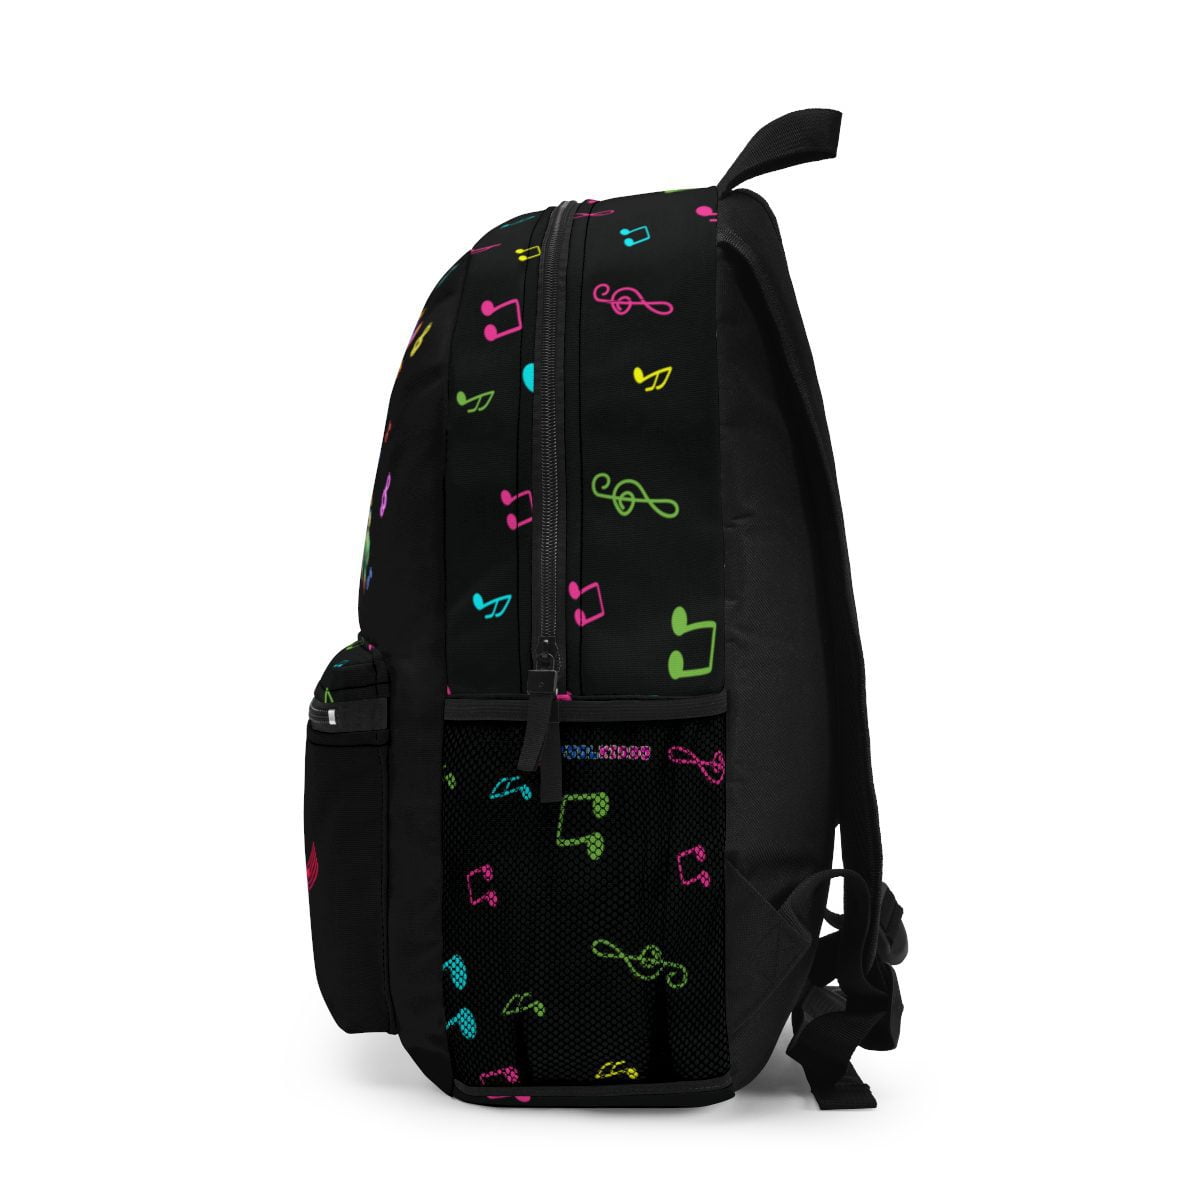 My Singing Monsters Backpack Funny and Colorful Characters Black Background Cool Kiddo 14